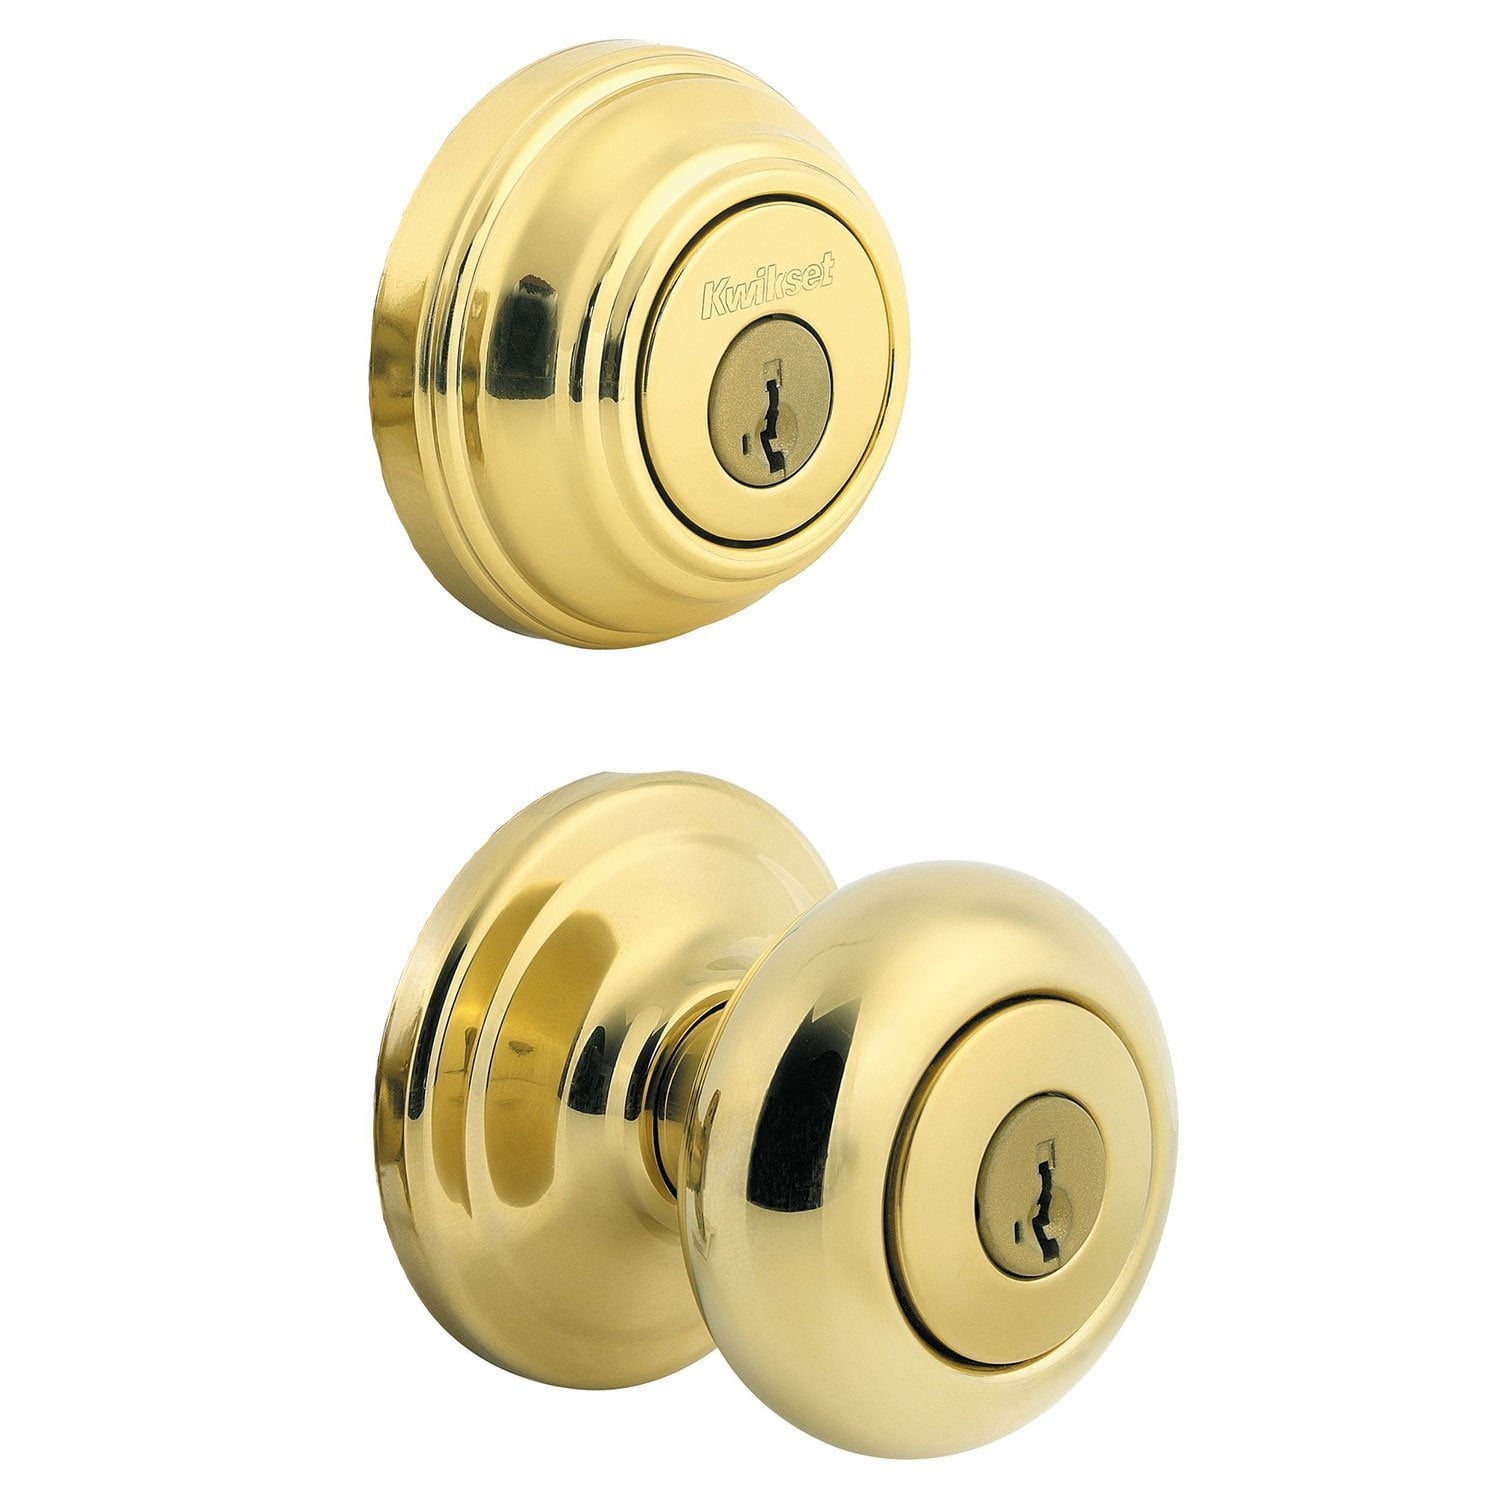 Kwikset 991 Juno Entry Knob and Single Cylinder Deadbolt Combo Pack  featuring SmartKey in Satin Nickel